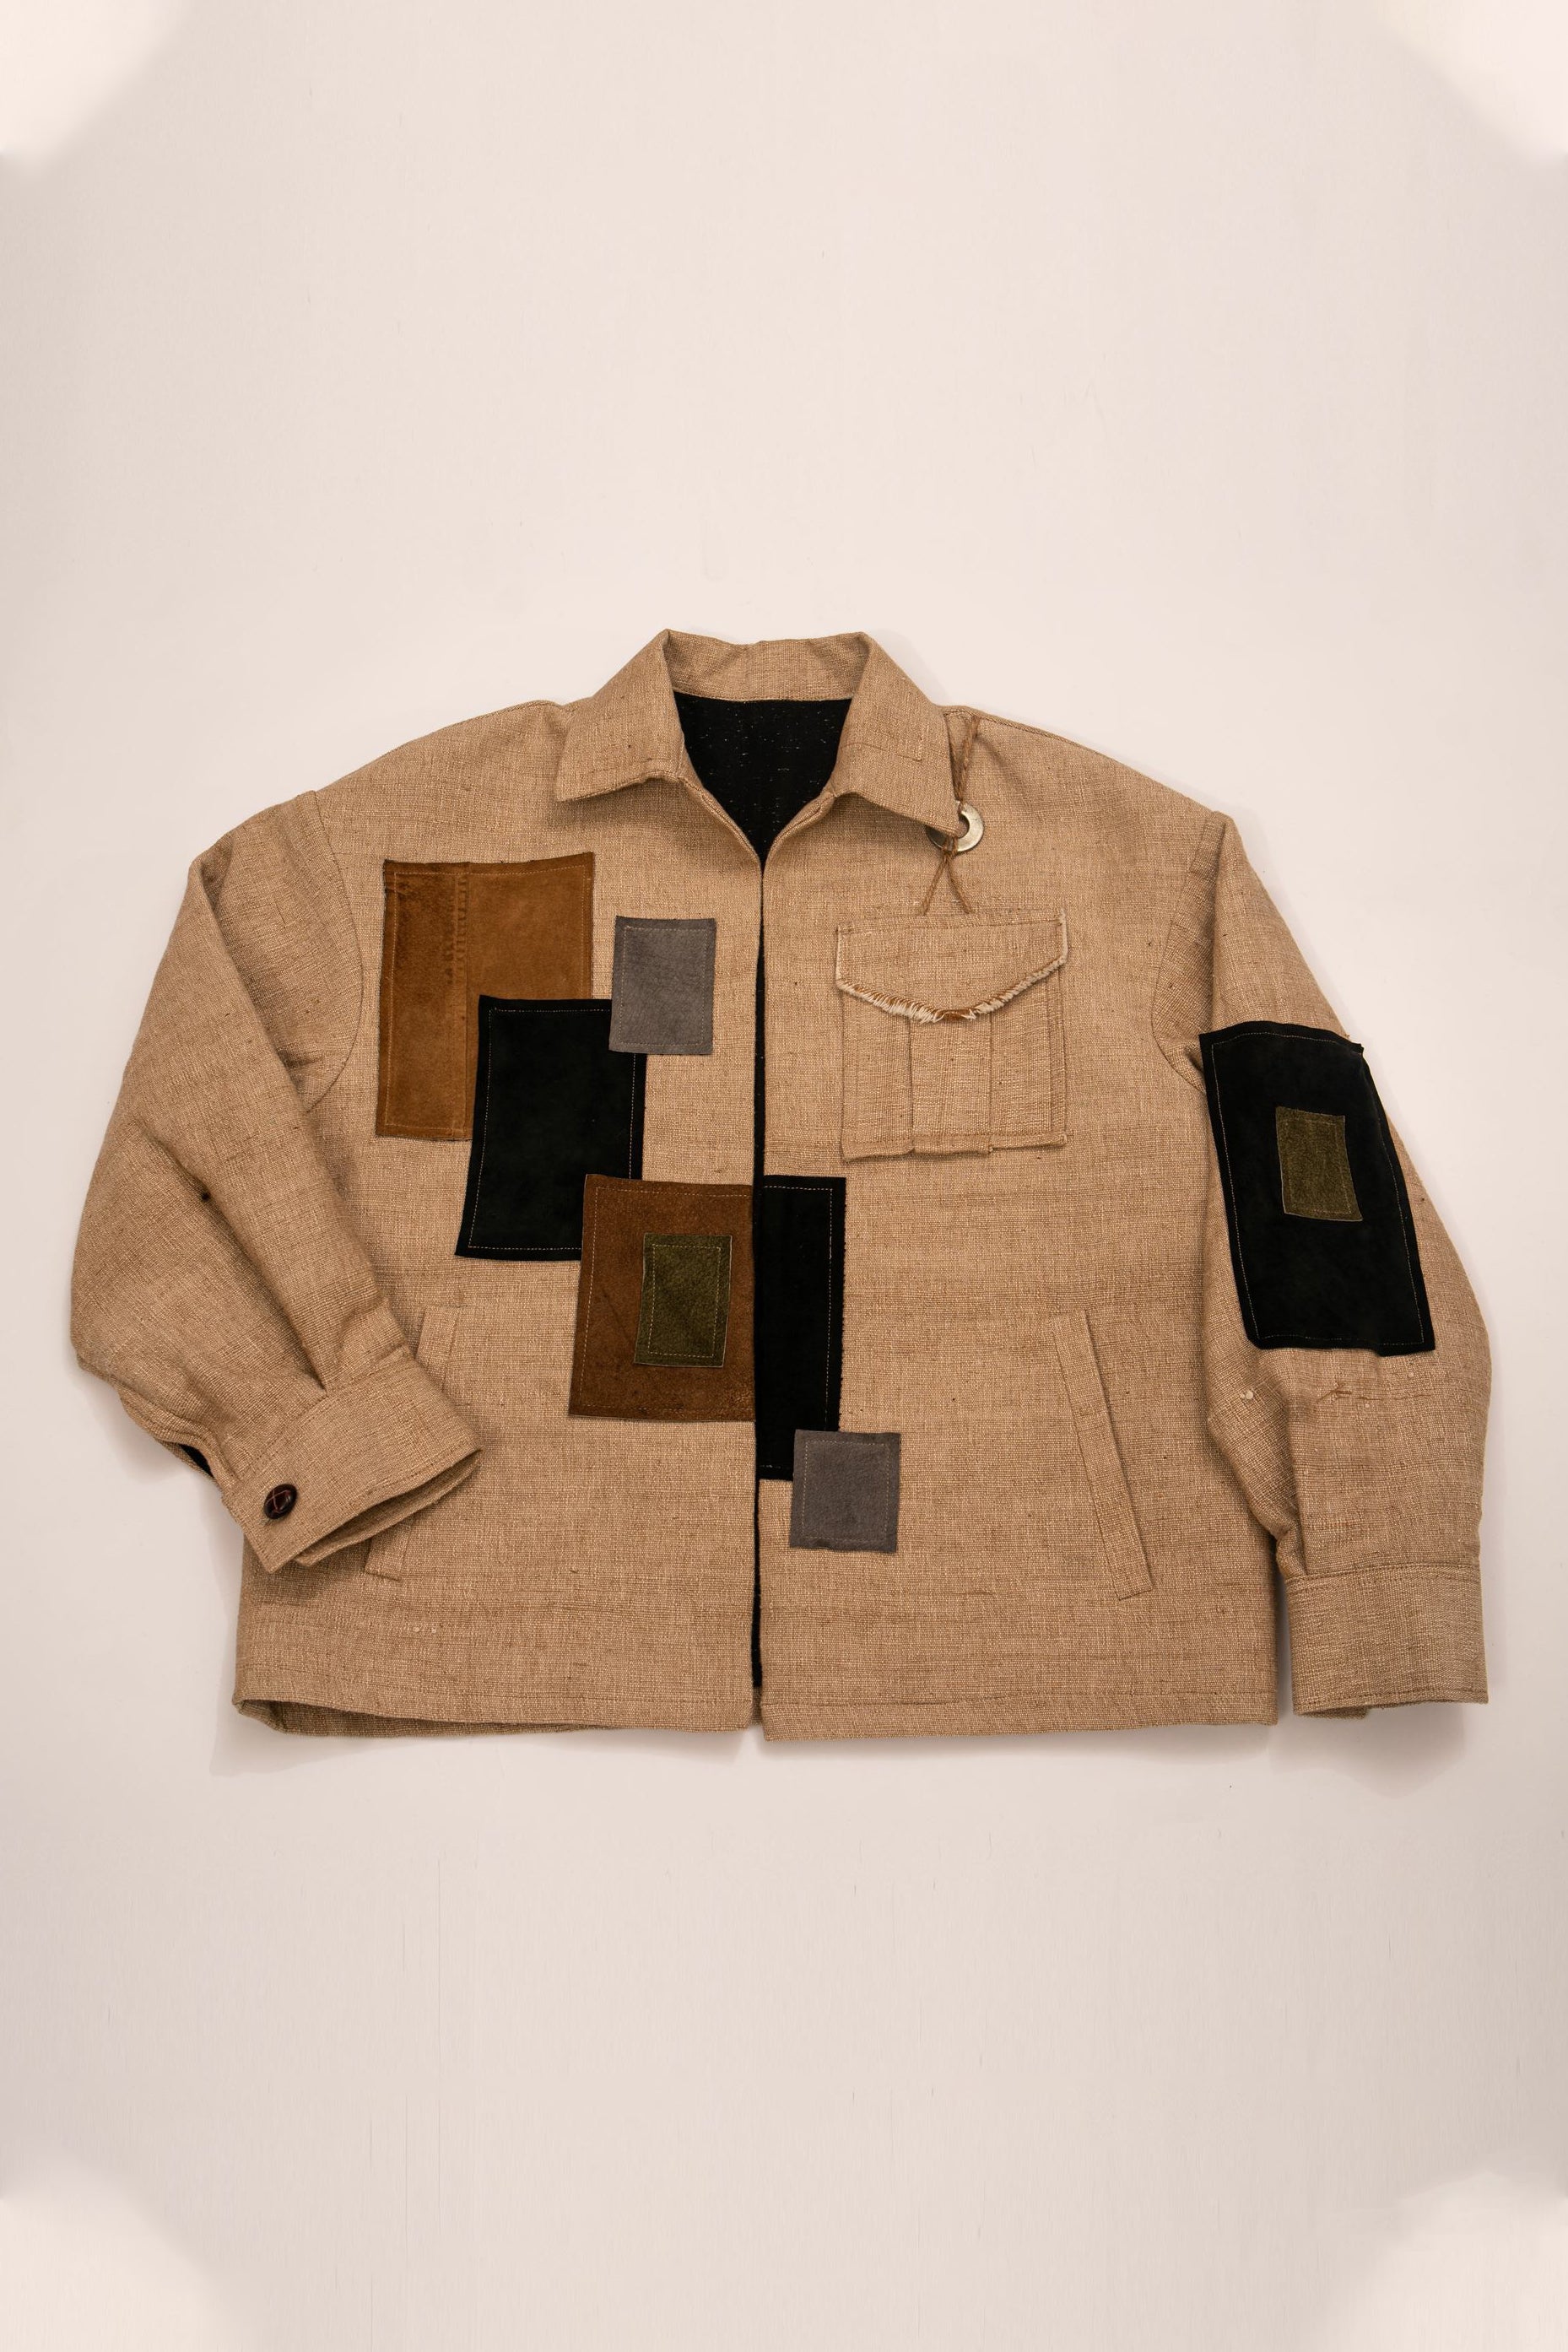 SIGNATURE HAND WOVEN JACKET by MXJ